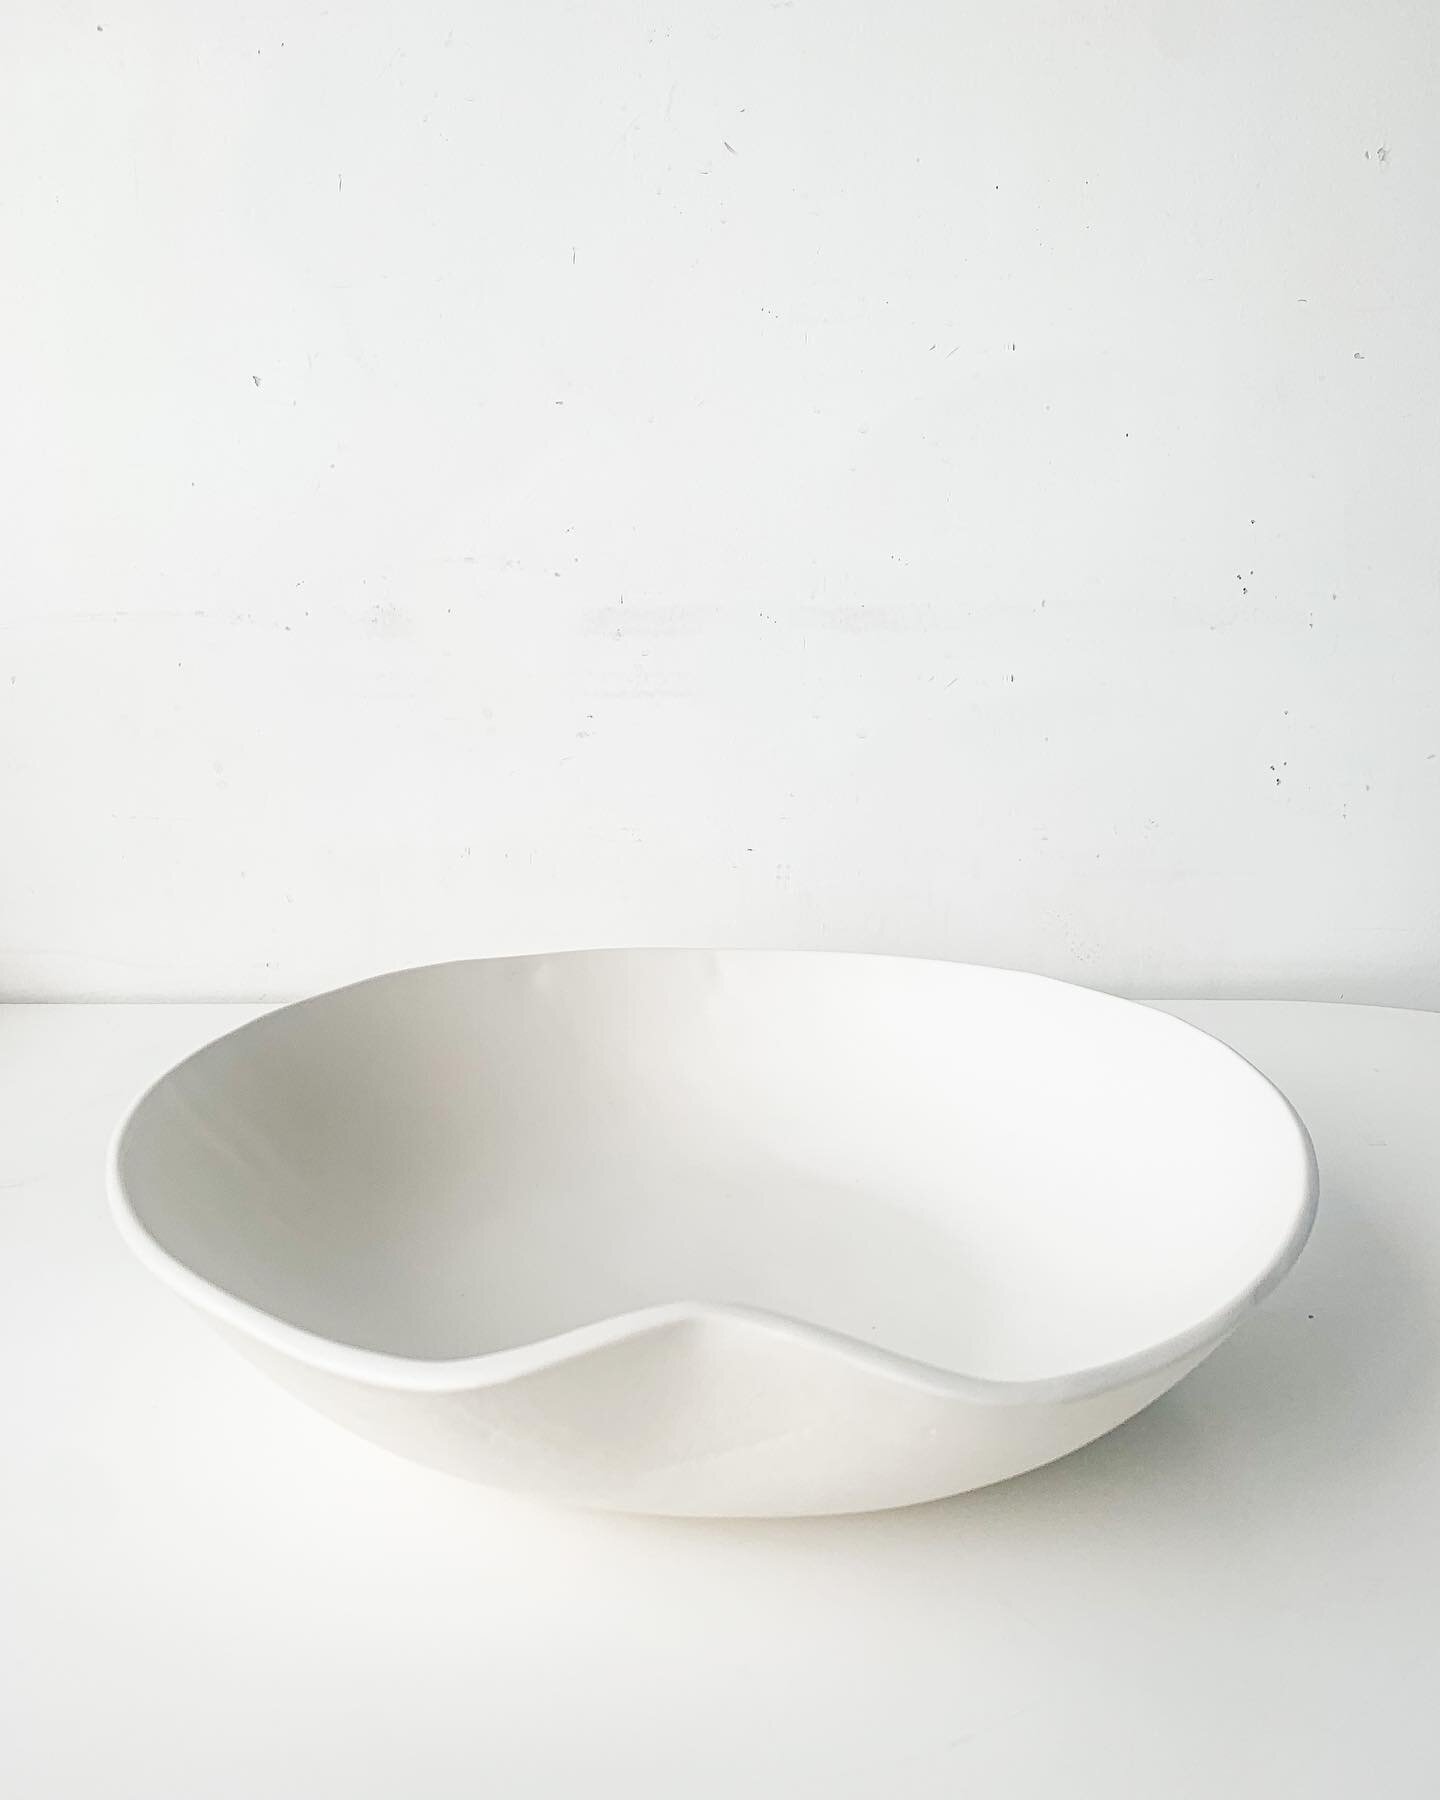 INTRODUCING THE LIMITED EDITION - CURVE COLLECTION - Large scale pieces in Porcelain -  Curve Bowl and Curve Platter coming Nov 9th on lookslikewhite.com shiny glaze only. All pieces coming soon in Matte white and black exclusively at @mobiliacanada.